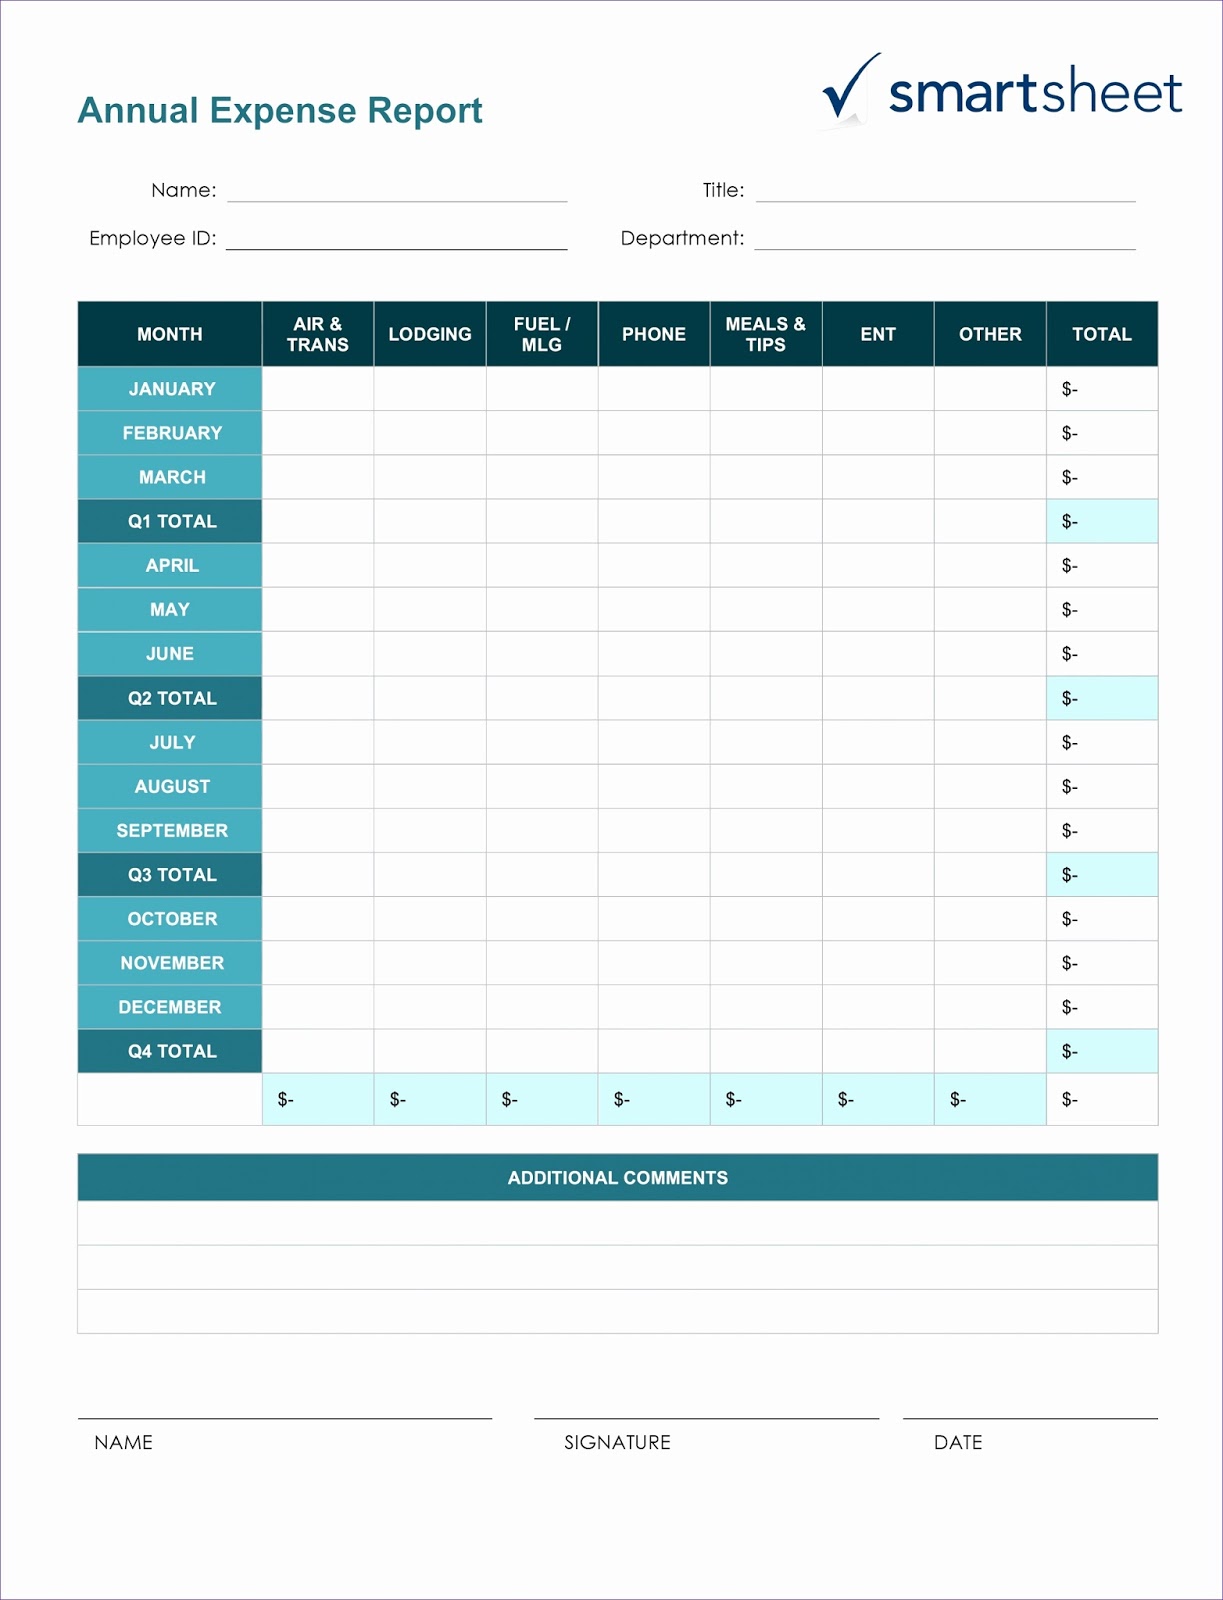 business-travel-expense-tracker-template